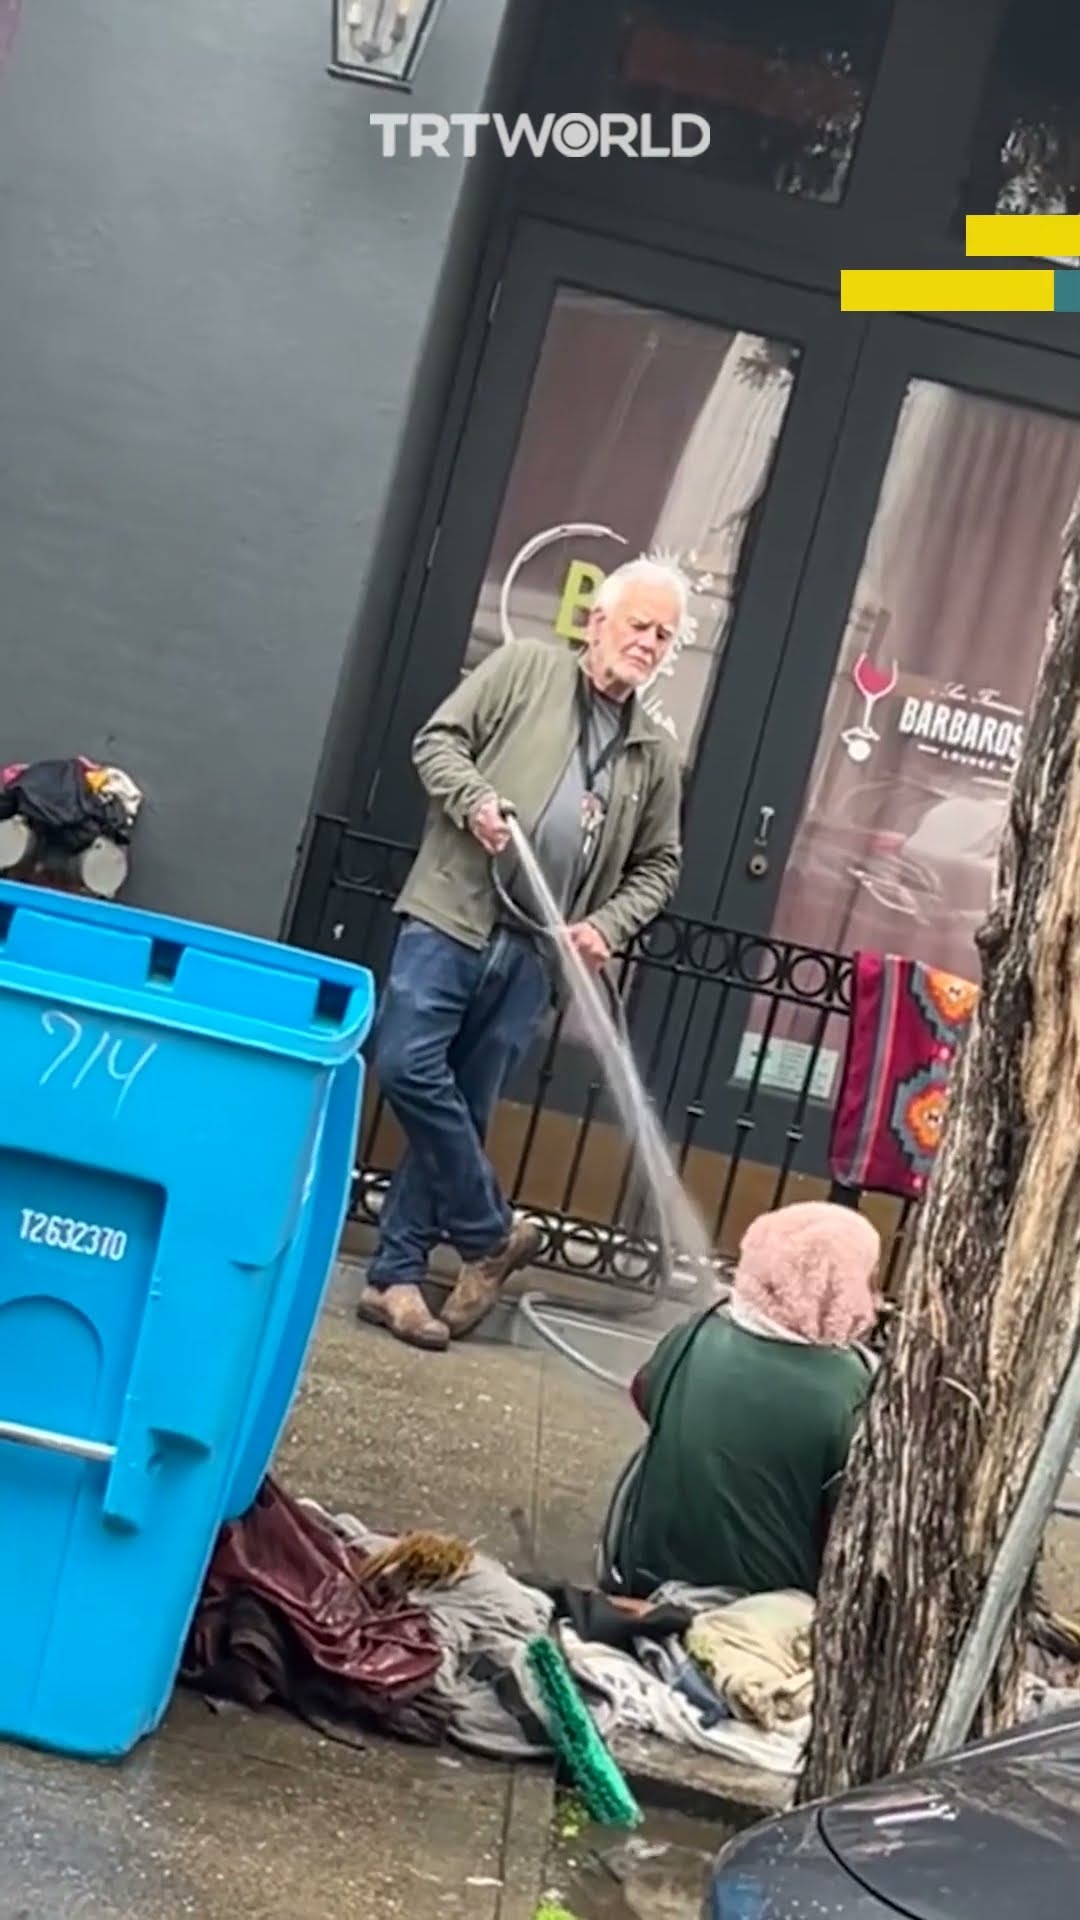 San Francisco art gallery owner sprays water at homeless woman